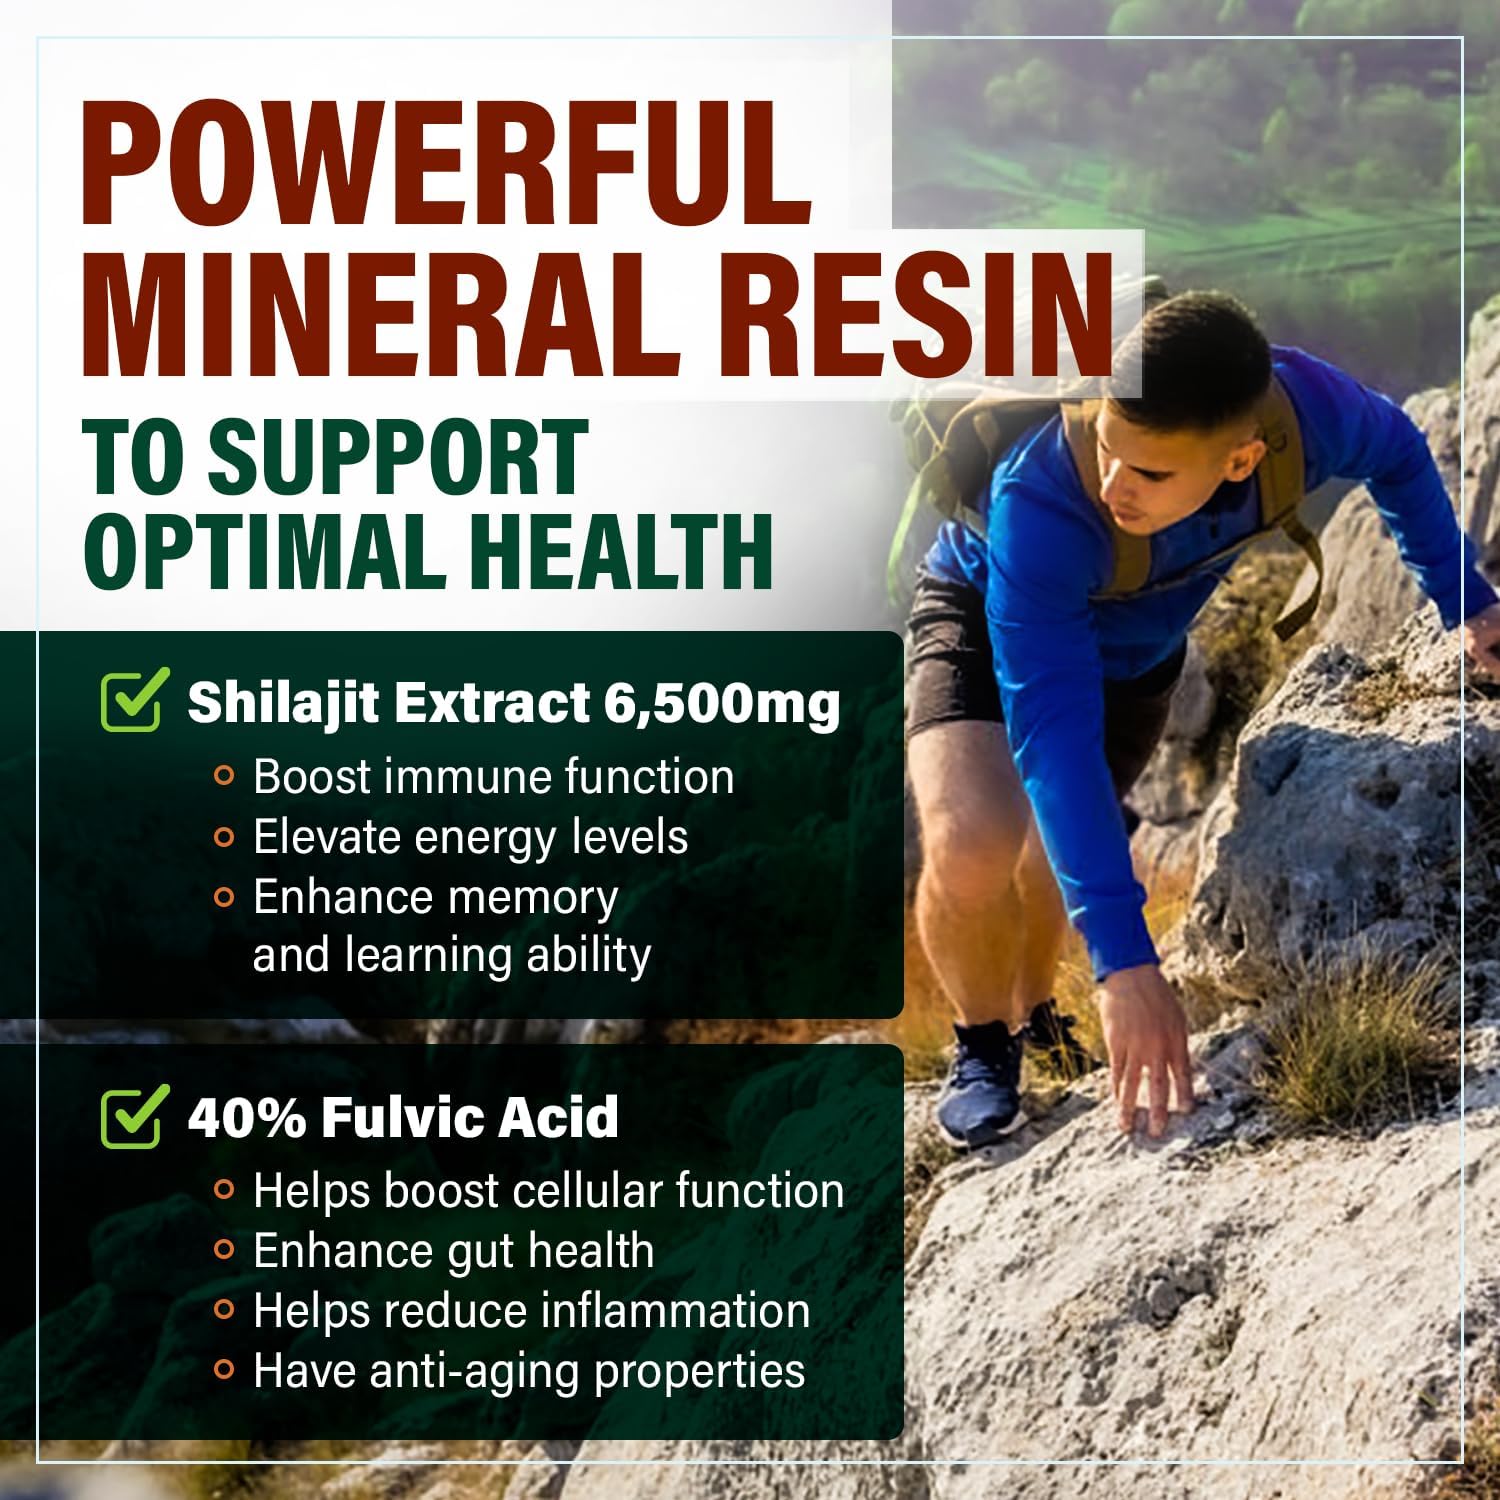 Poweful mineral resin